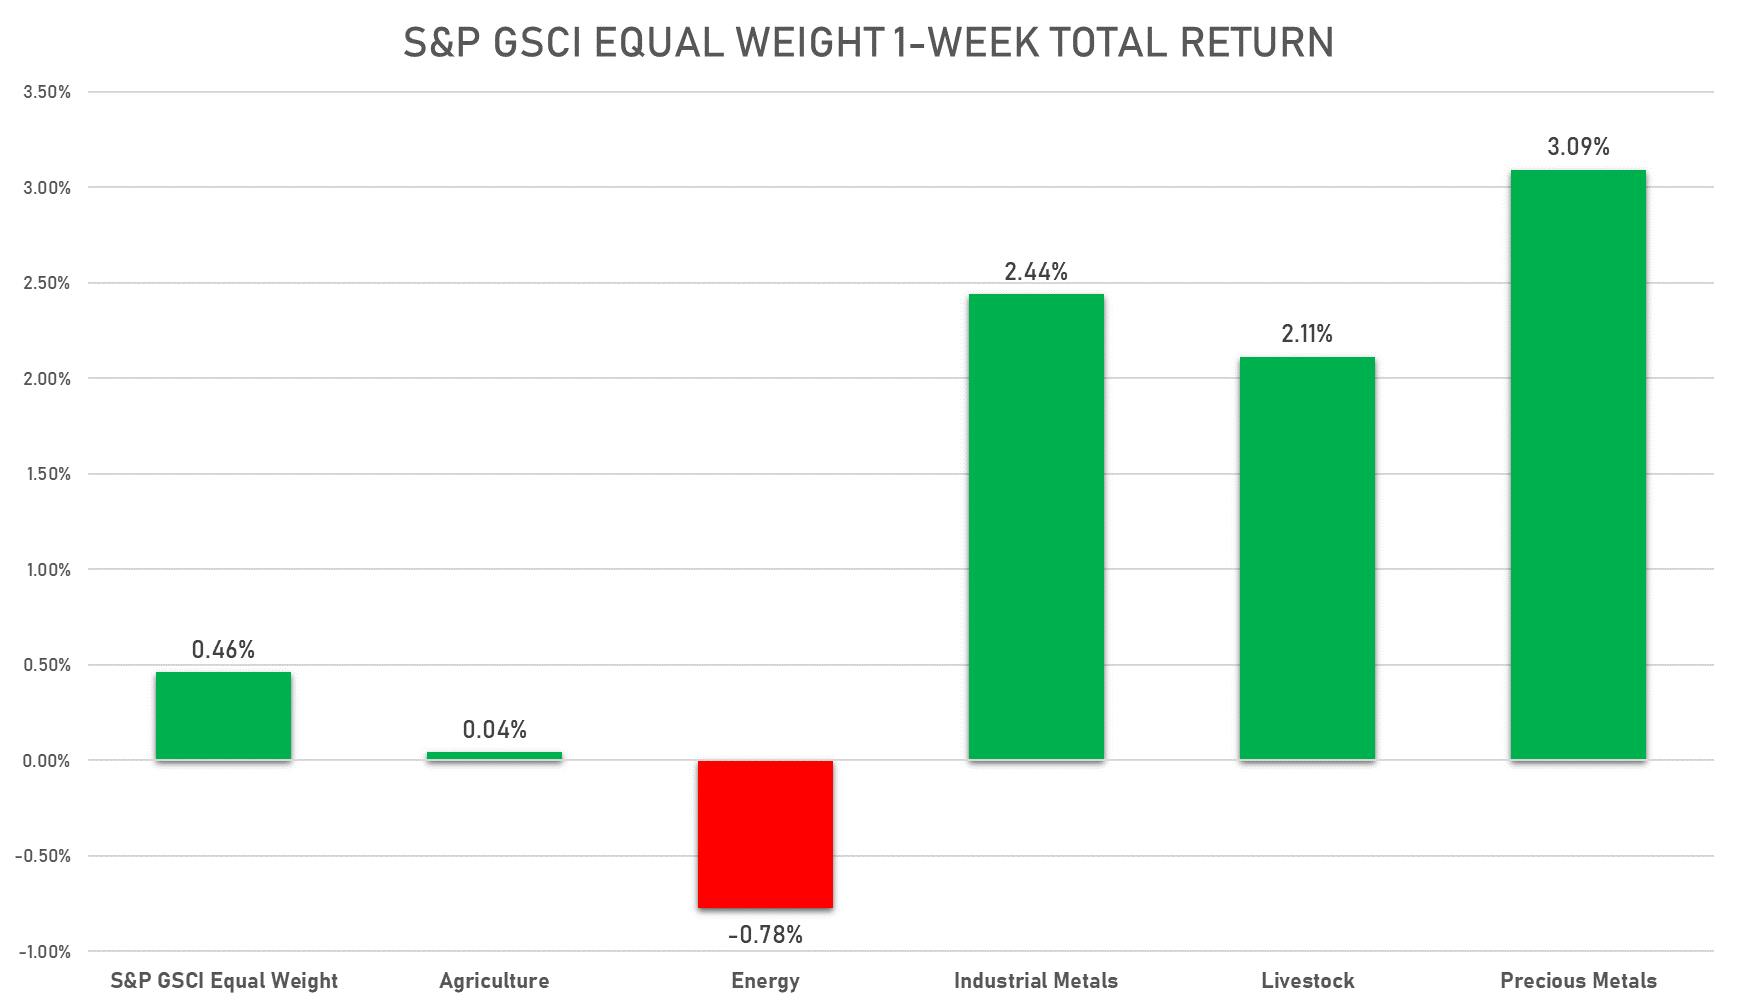 S&P GSCI Sub Indices This Week 2/18/22 | Sources: phipost.com, FactSet data